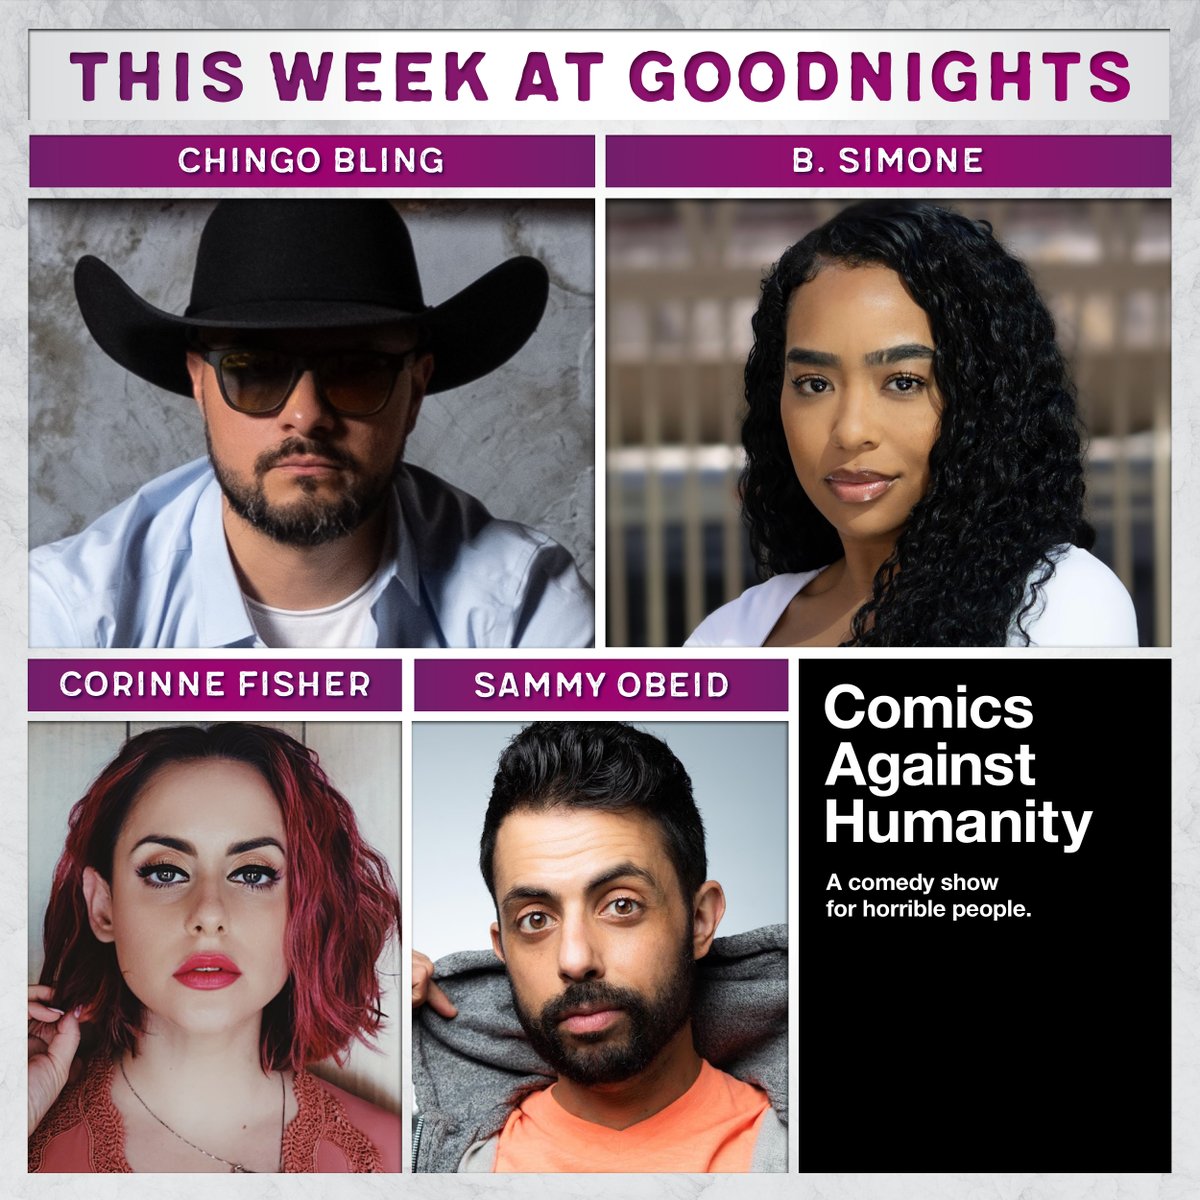 This Week at Goodnights | @PhilanthropyGal, @SammyObeid, Comics Against Humanity, @ChingoBling + @mary_santora in Room 861, + @TheBSimone headlines this weekend! Get your tickets here: bit.ly/2QKAQE5